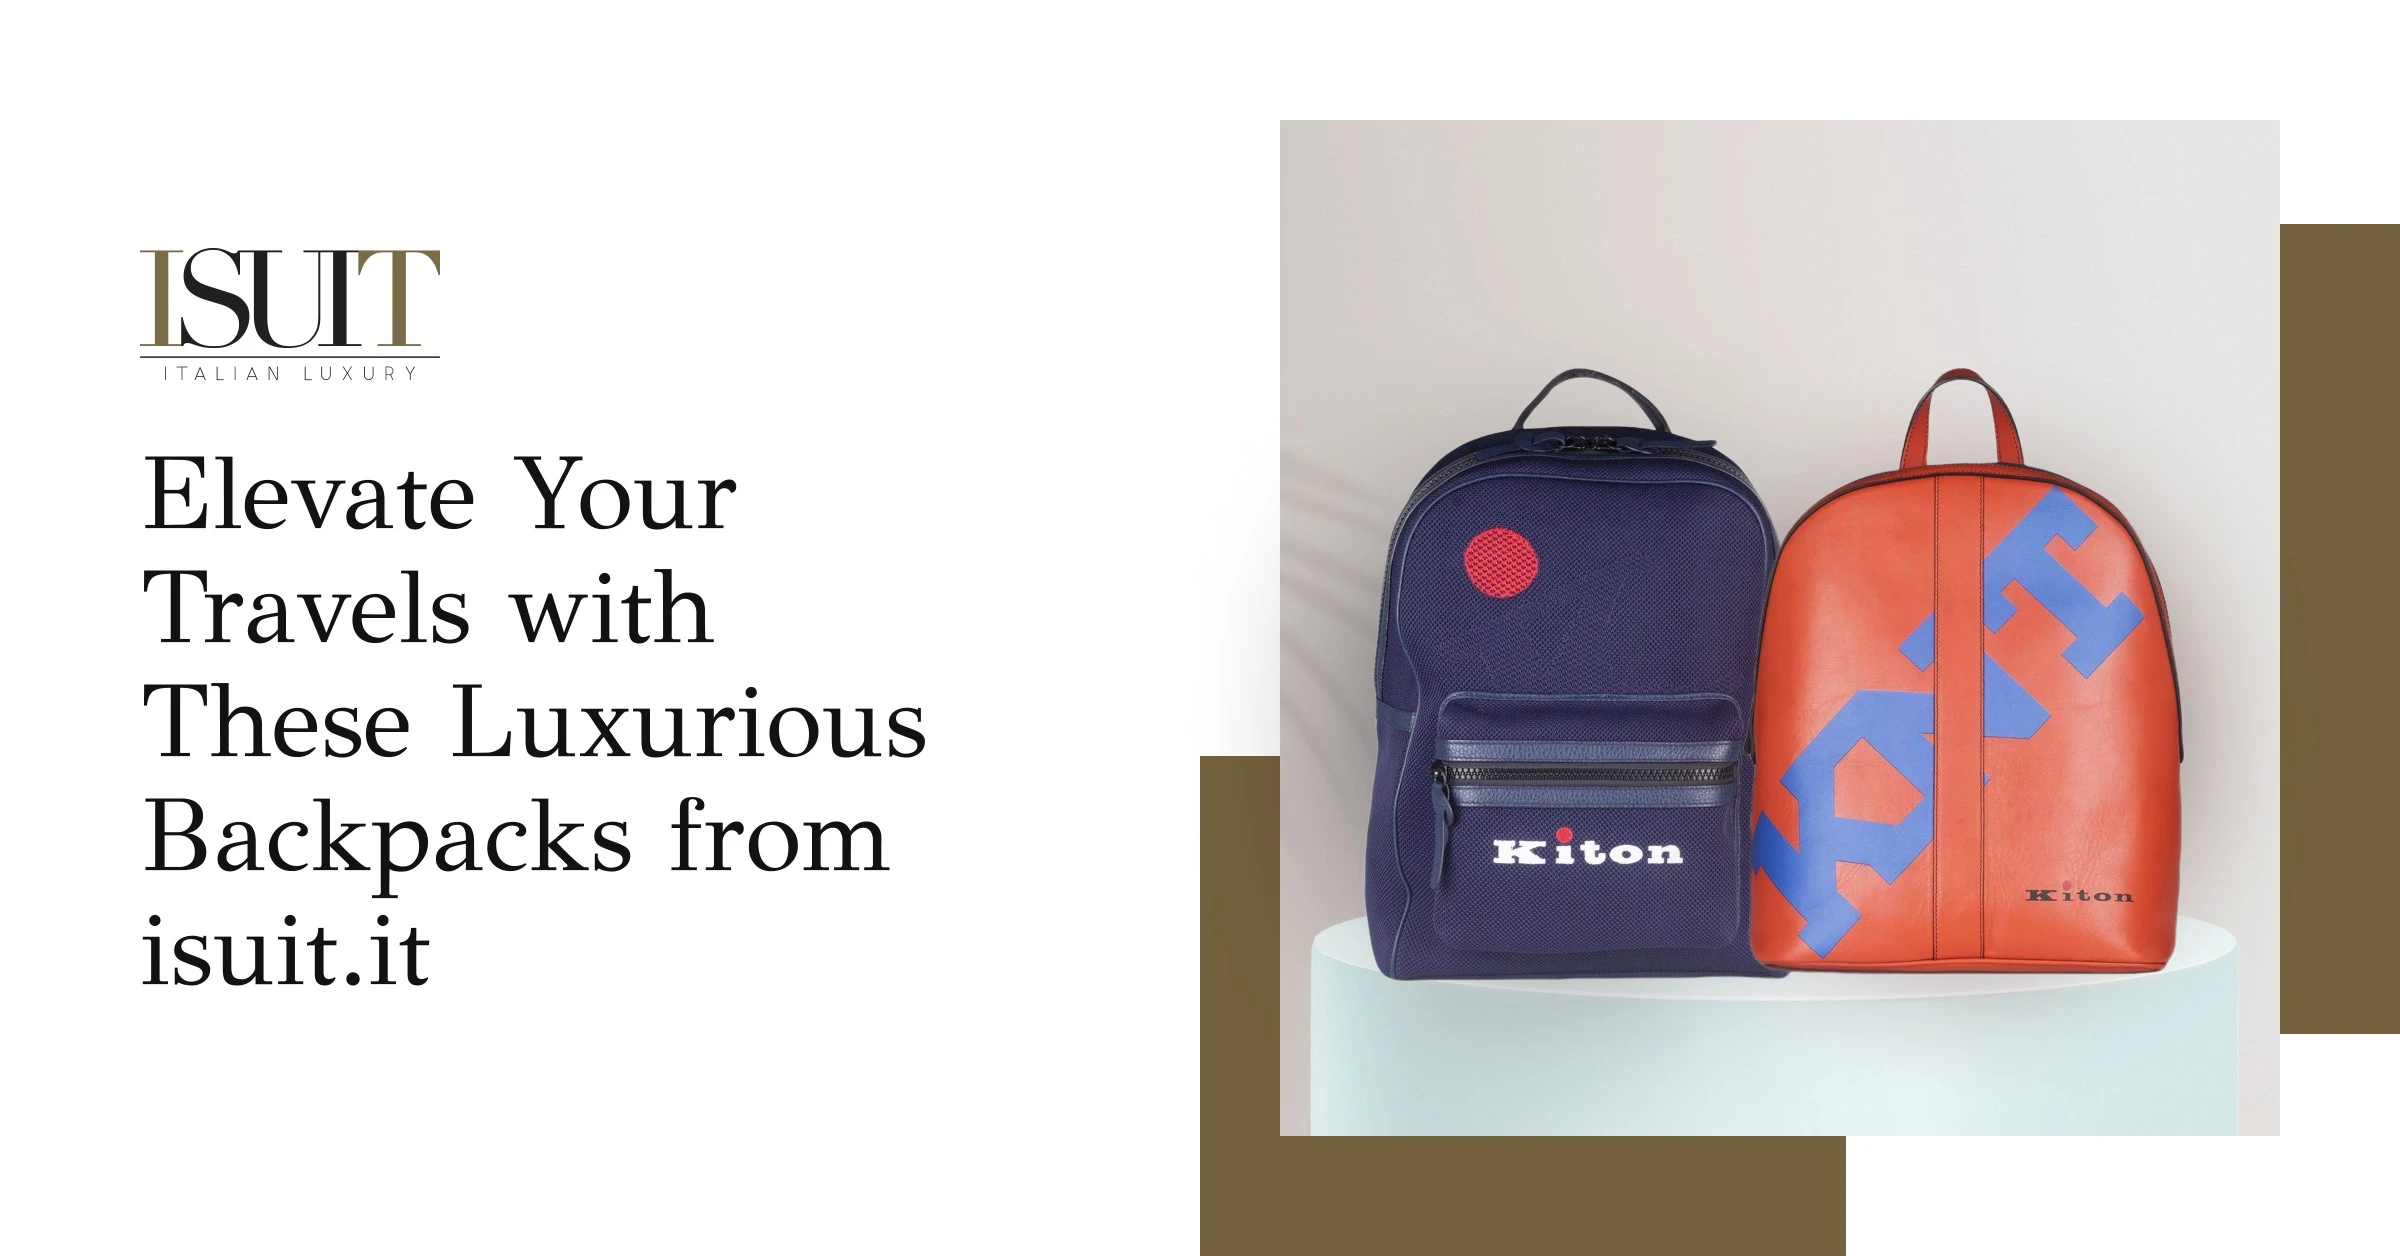 Elevate Your Travels with These Luxurious Backpacks from isuit.it